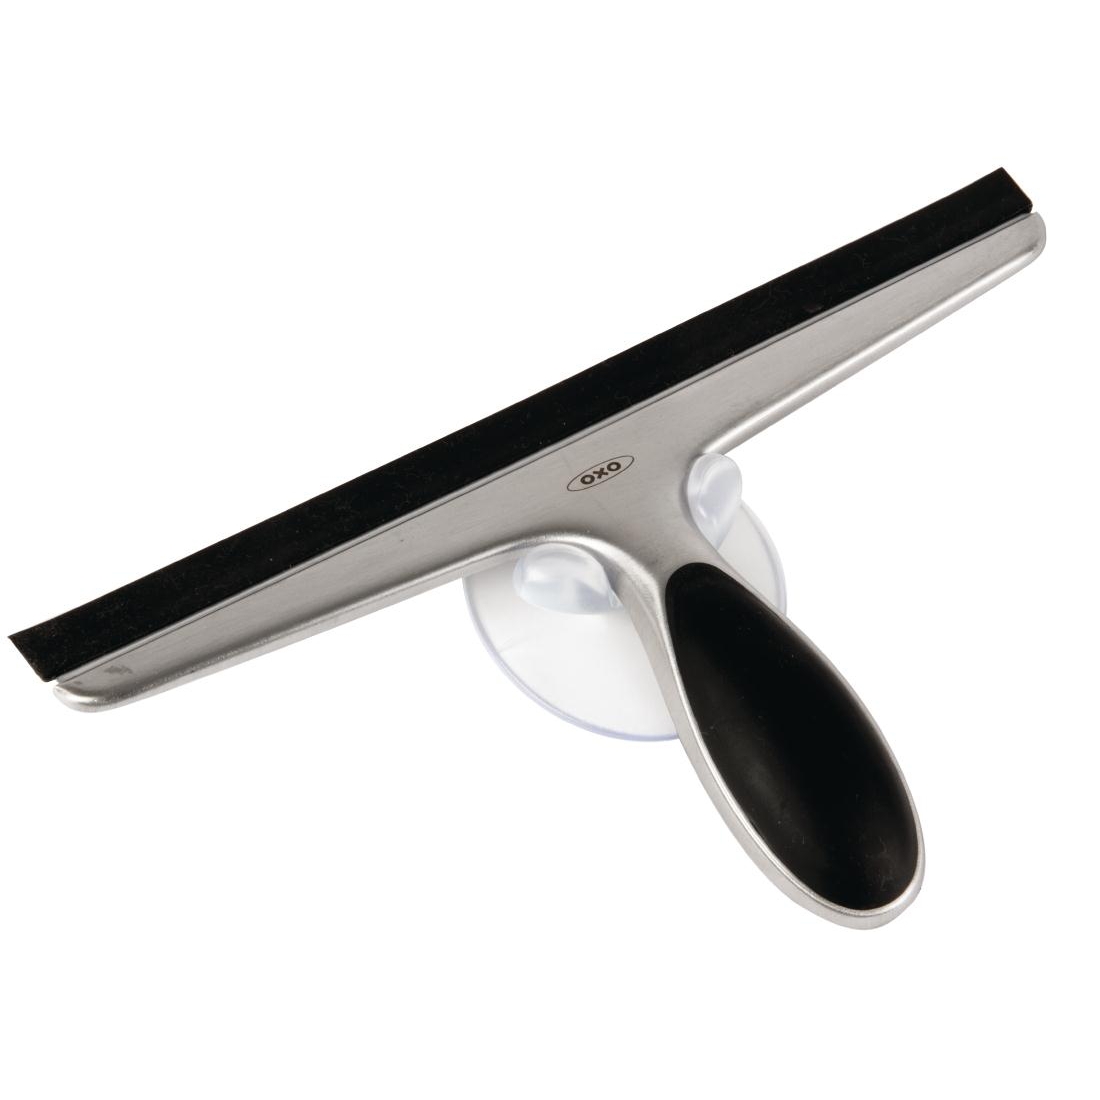 Oxo Good Grips Stainless Steel Squeegee